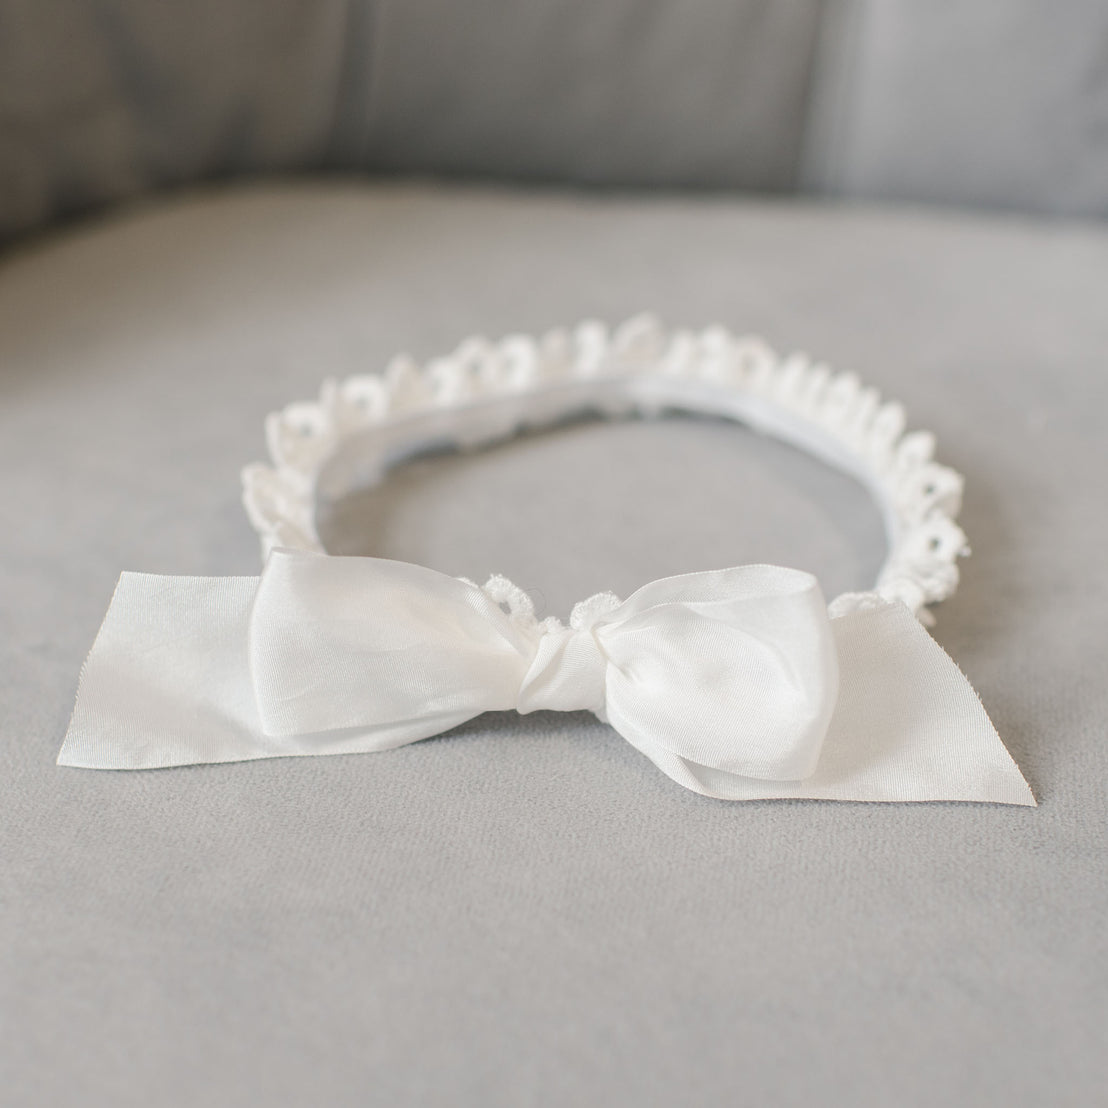 A handmade Grace Headband featuring a large silk ribbon bow in the center and small ruffles along the band, resting on a gray cushioned surface.